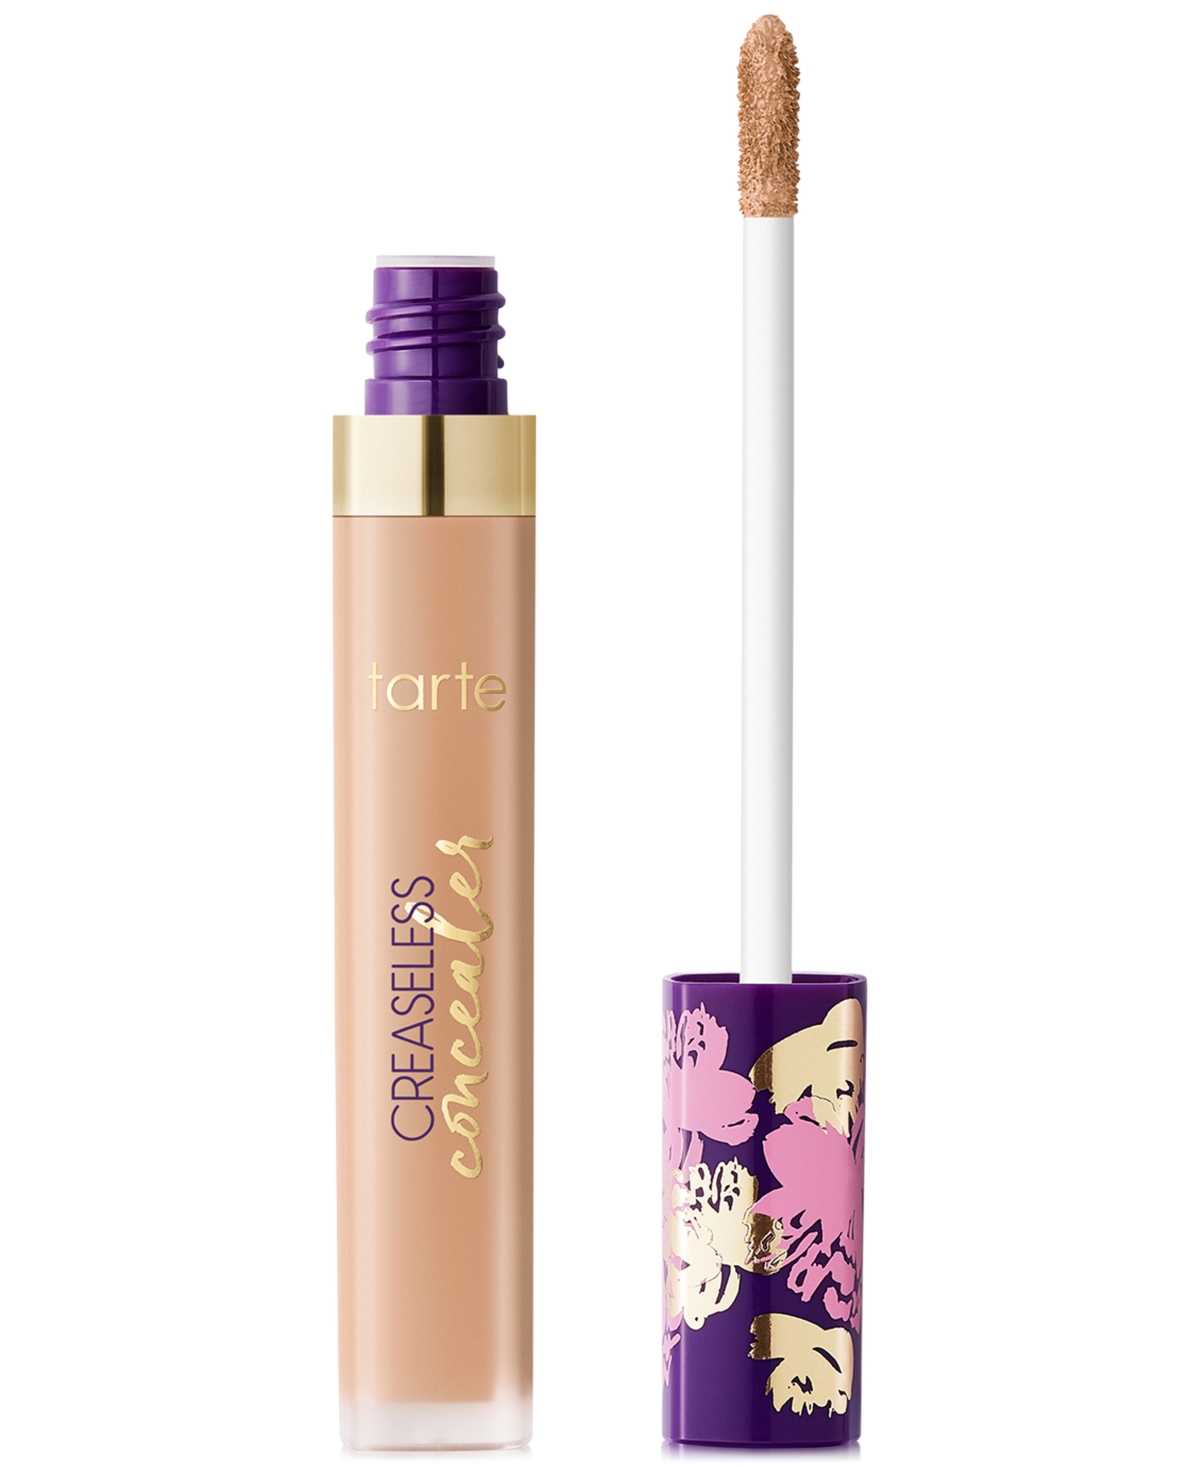 Tarte Creaseless Concealer In Hlighthoney - Light Skin With Warm,peac